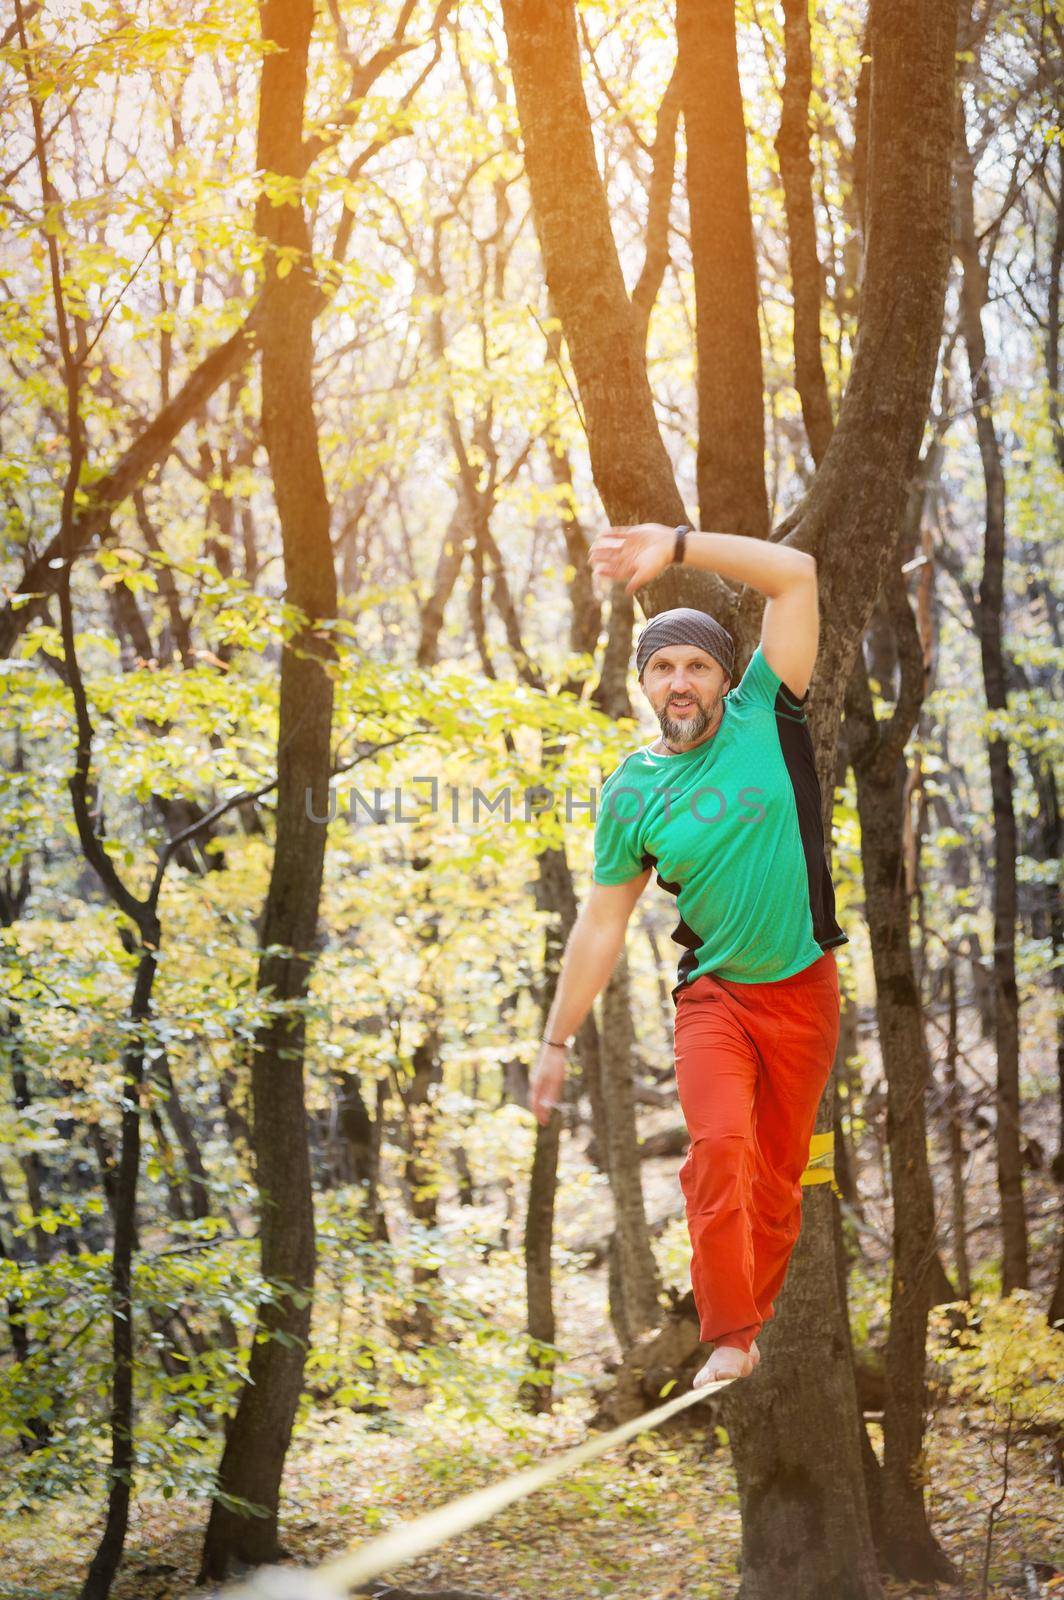 Male tightrope walker balancing barefoot on slackline in autumn forest. The concept of outdoor sports and active life of people aged by yanik88